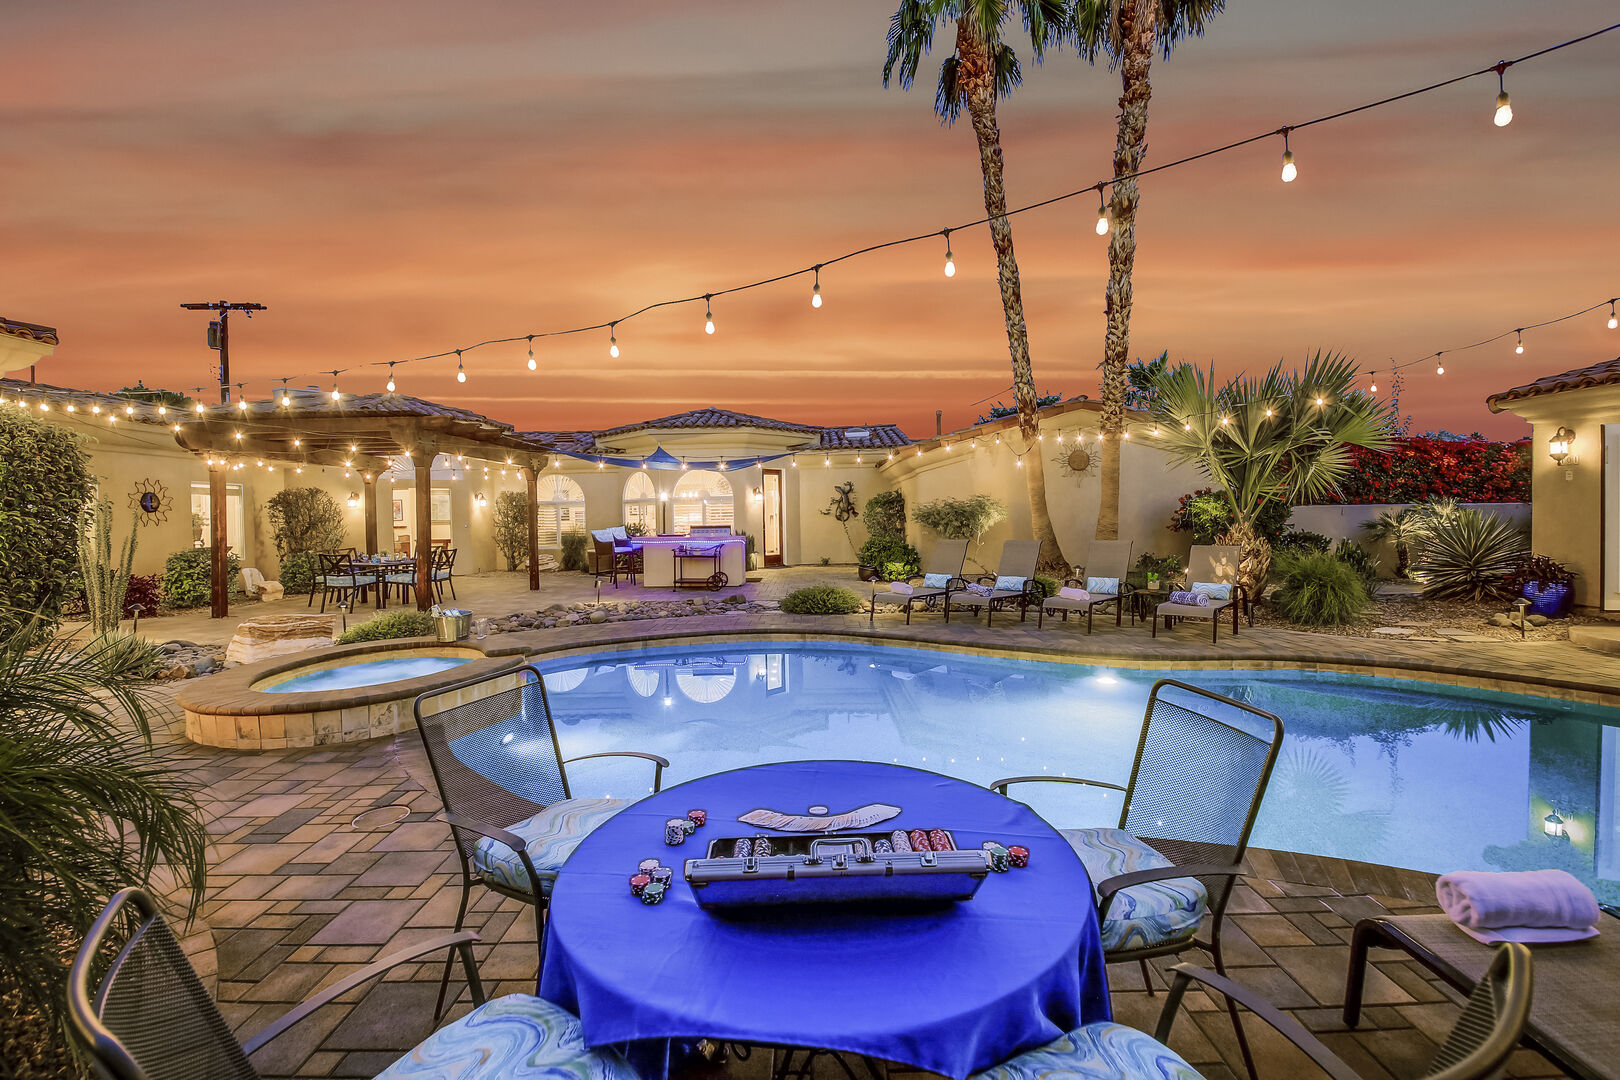 There are numerous areas to enjoy your company and watch a beautiful desert sunset.